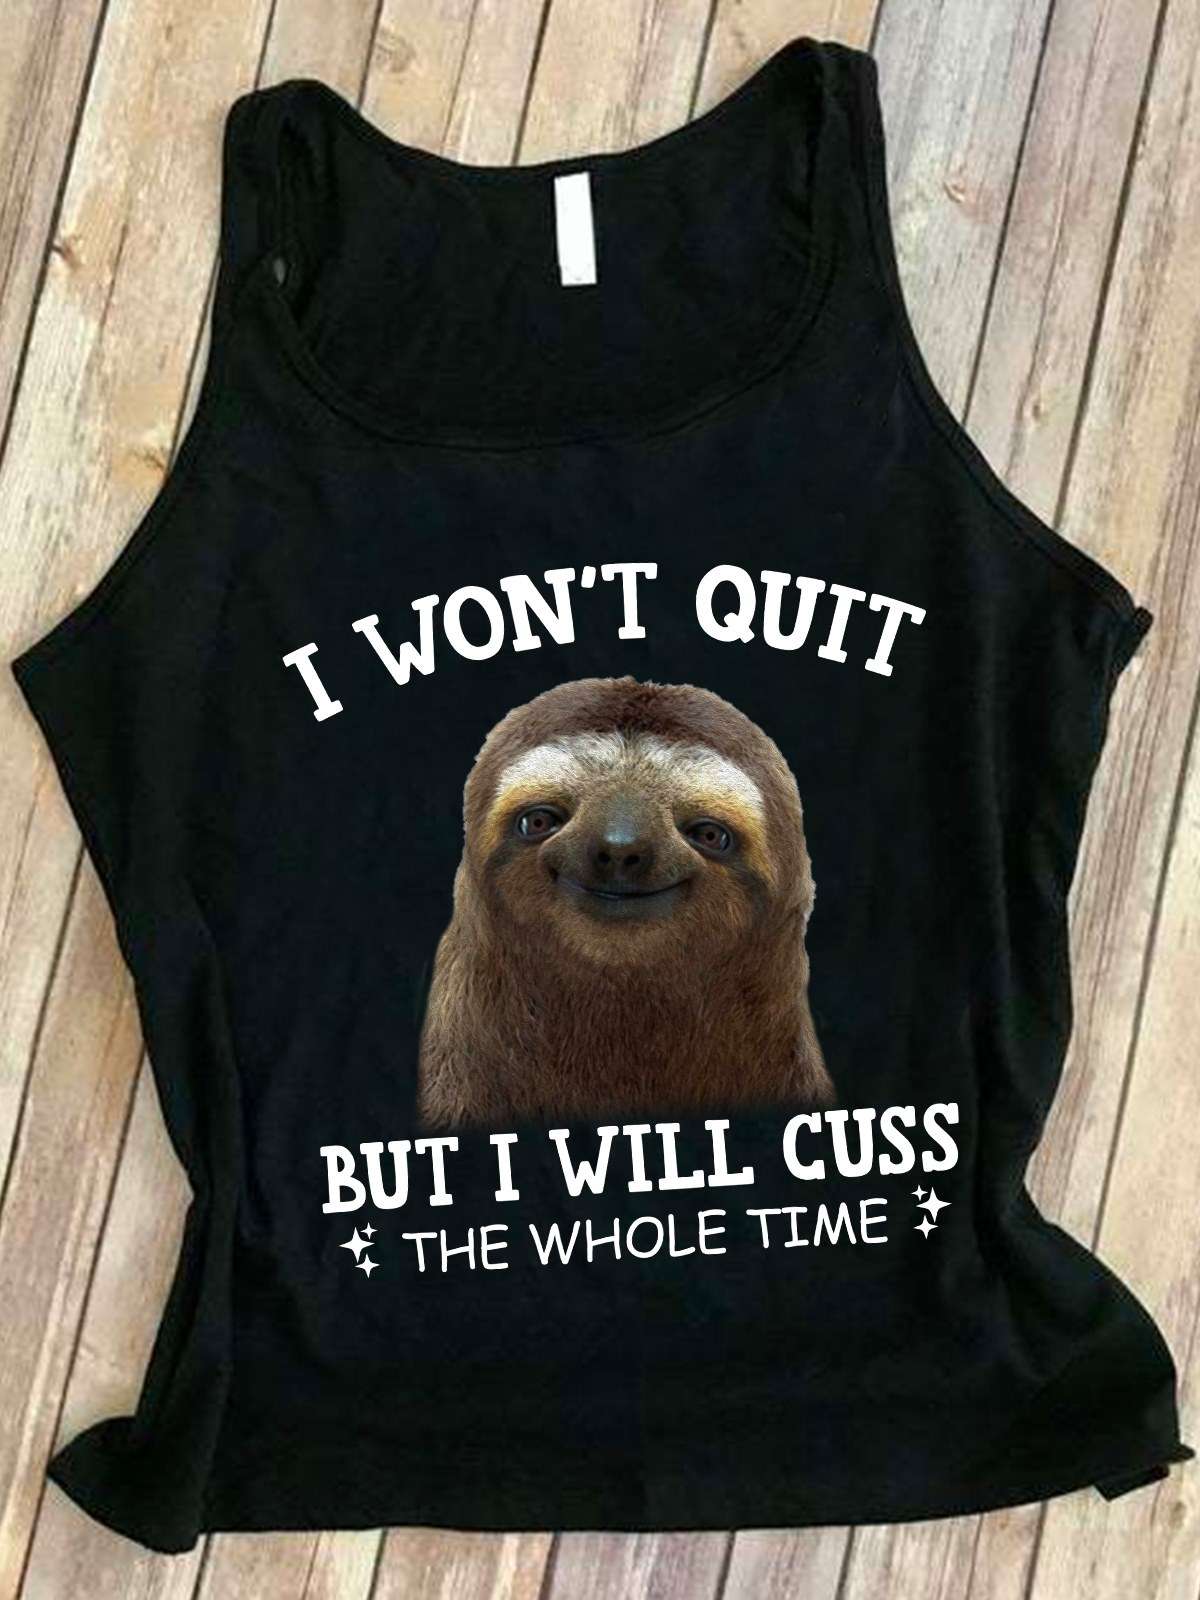 I won't quit but I will cuss the whole time - Love cussing, sloth lover